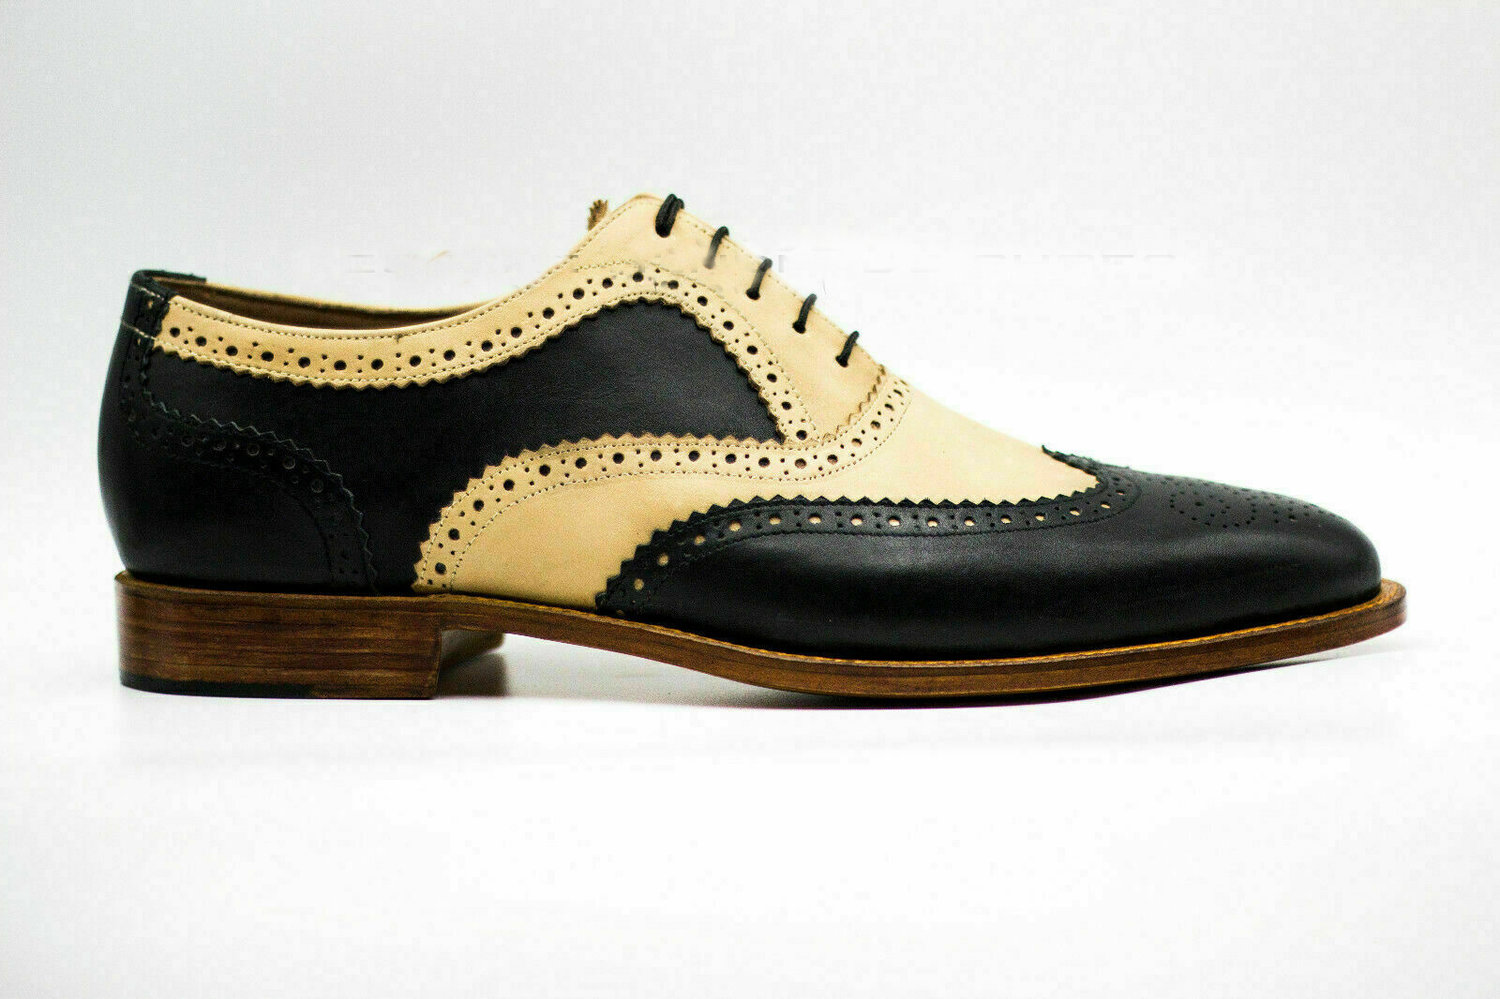 Details about  / Mens Lace Up Hollow Out Handmade Carving Real Leather Casual Brogues Shoes Chic